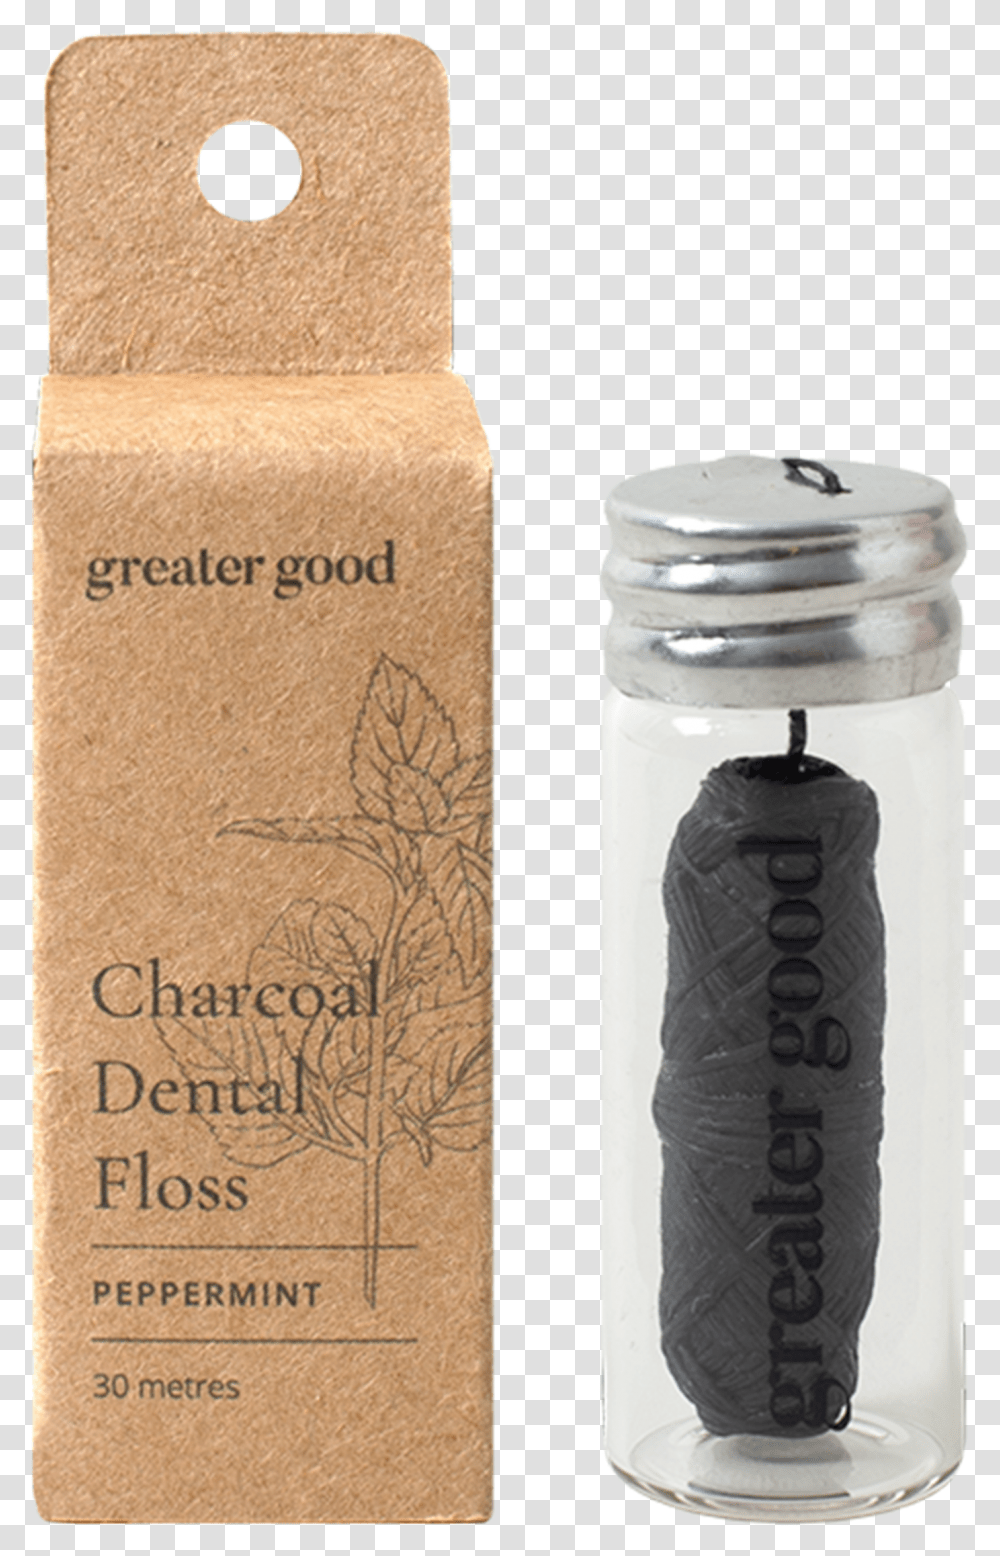 Class Lazyload Lazyload Mirage Cloudzoom Featured Image Glass Bottle, Book, Jar, Shaker, Fire Hydrant Transparent Png